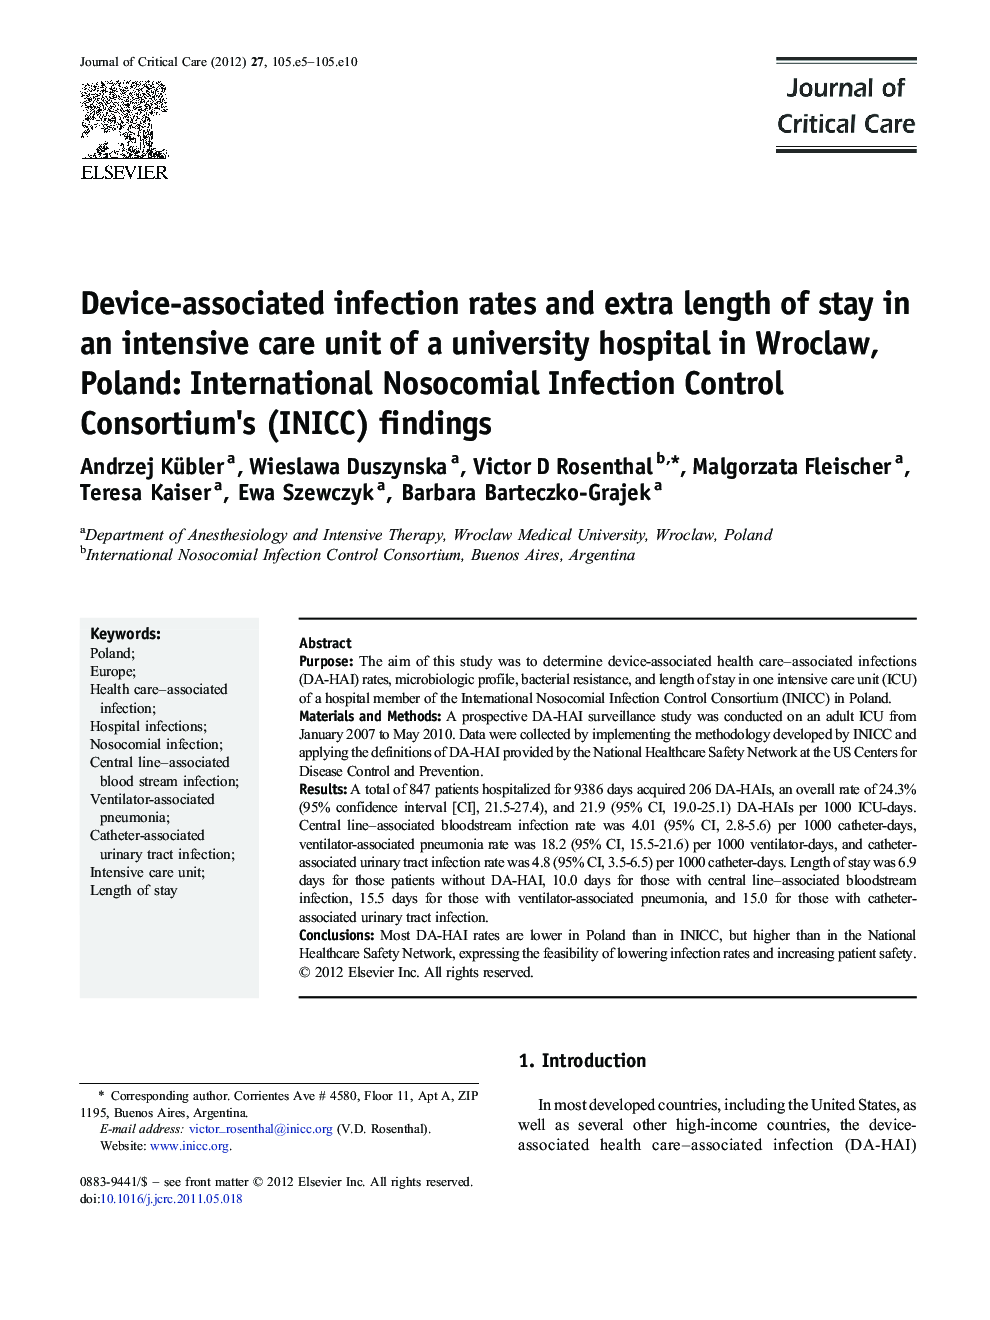 Device-associated infection rates and extra length of stay in an intensive care unit of a university hospital in Wroclaw, Poland: International Nosocomial Infection Control Consortium's (INICC) findings